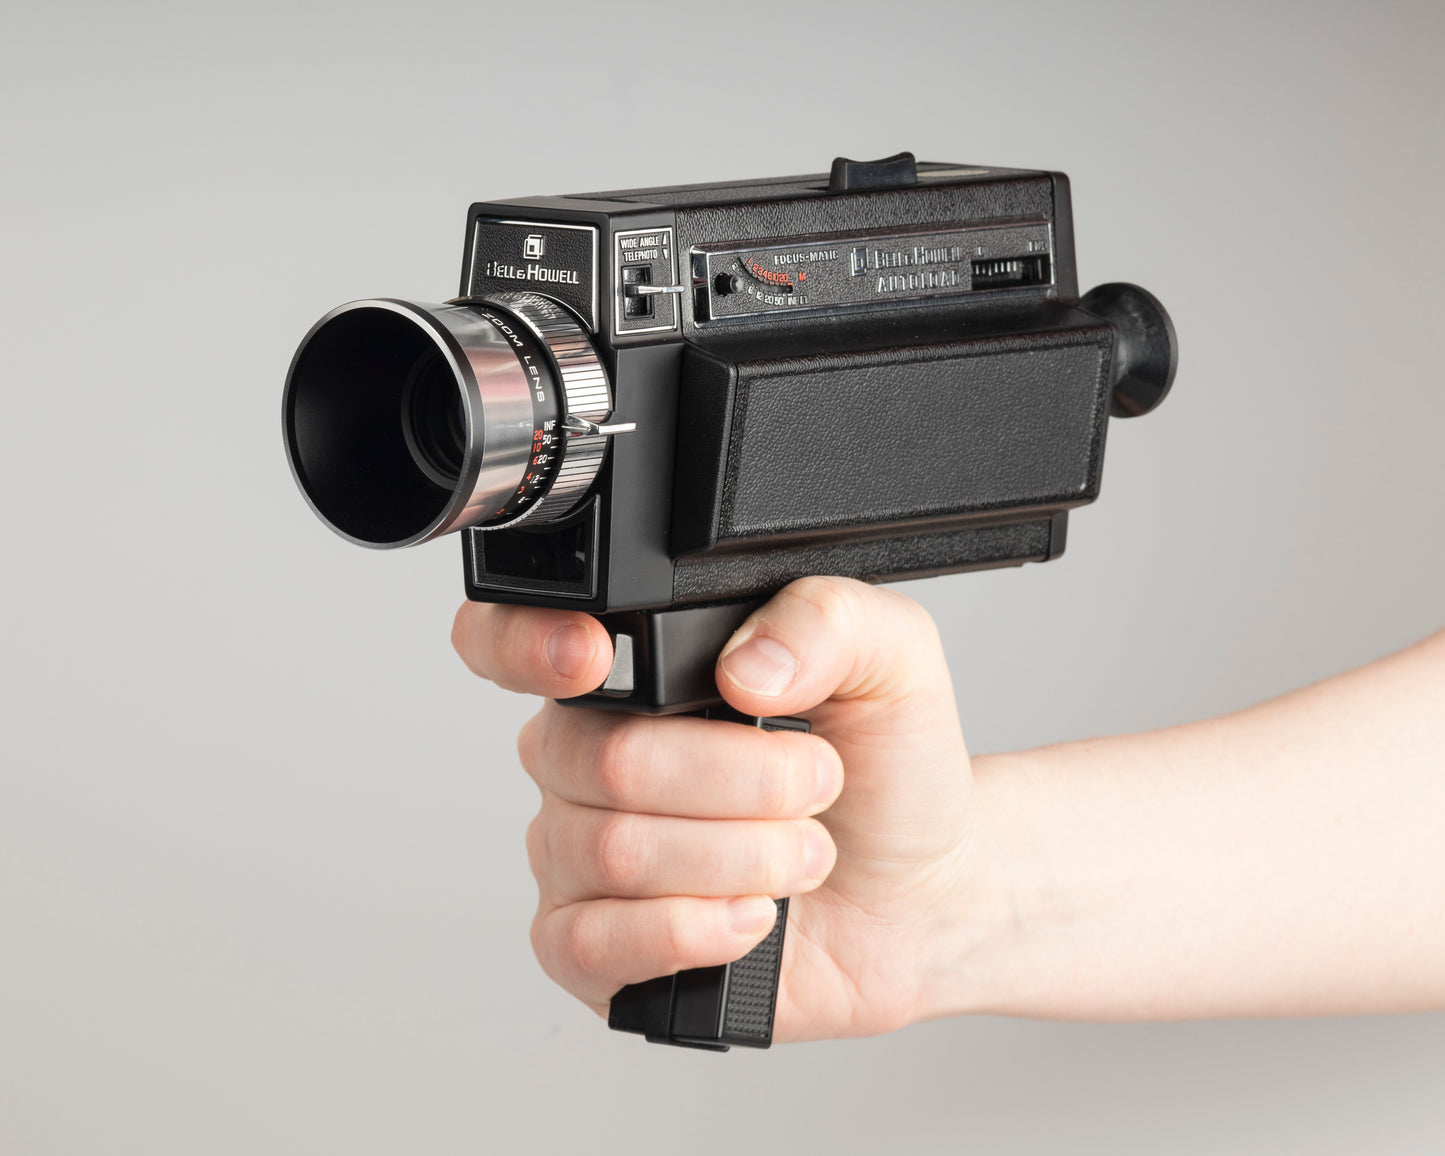 Bell and Howell 492 Super 8 movie camera